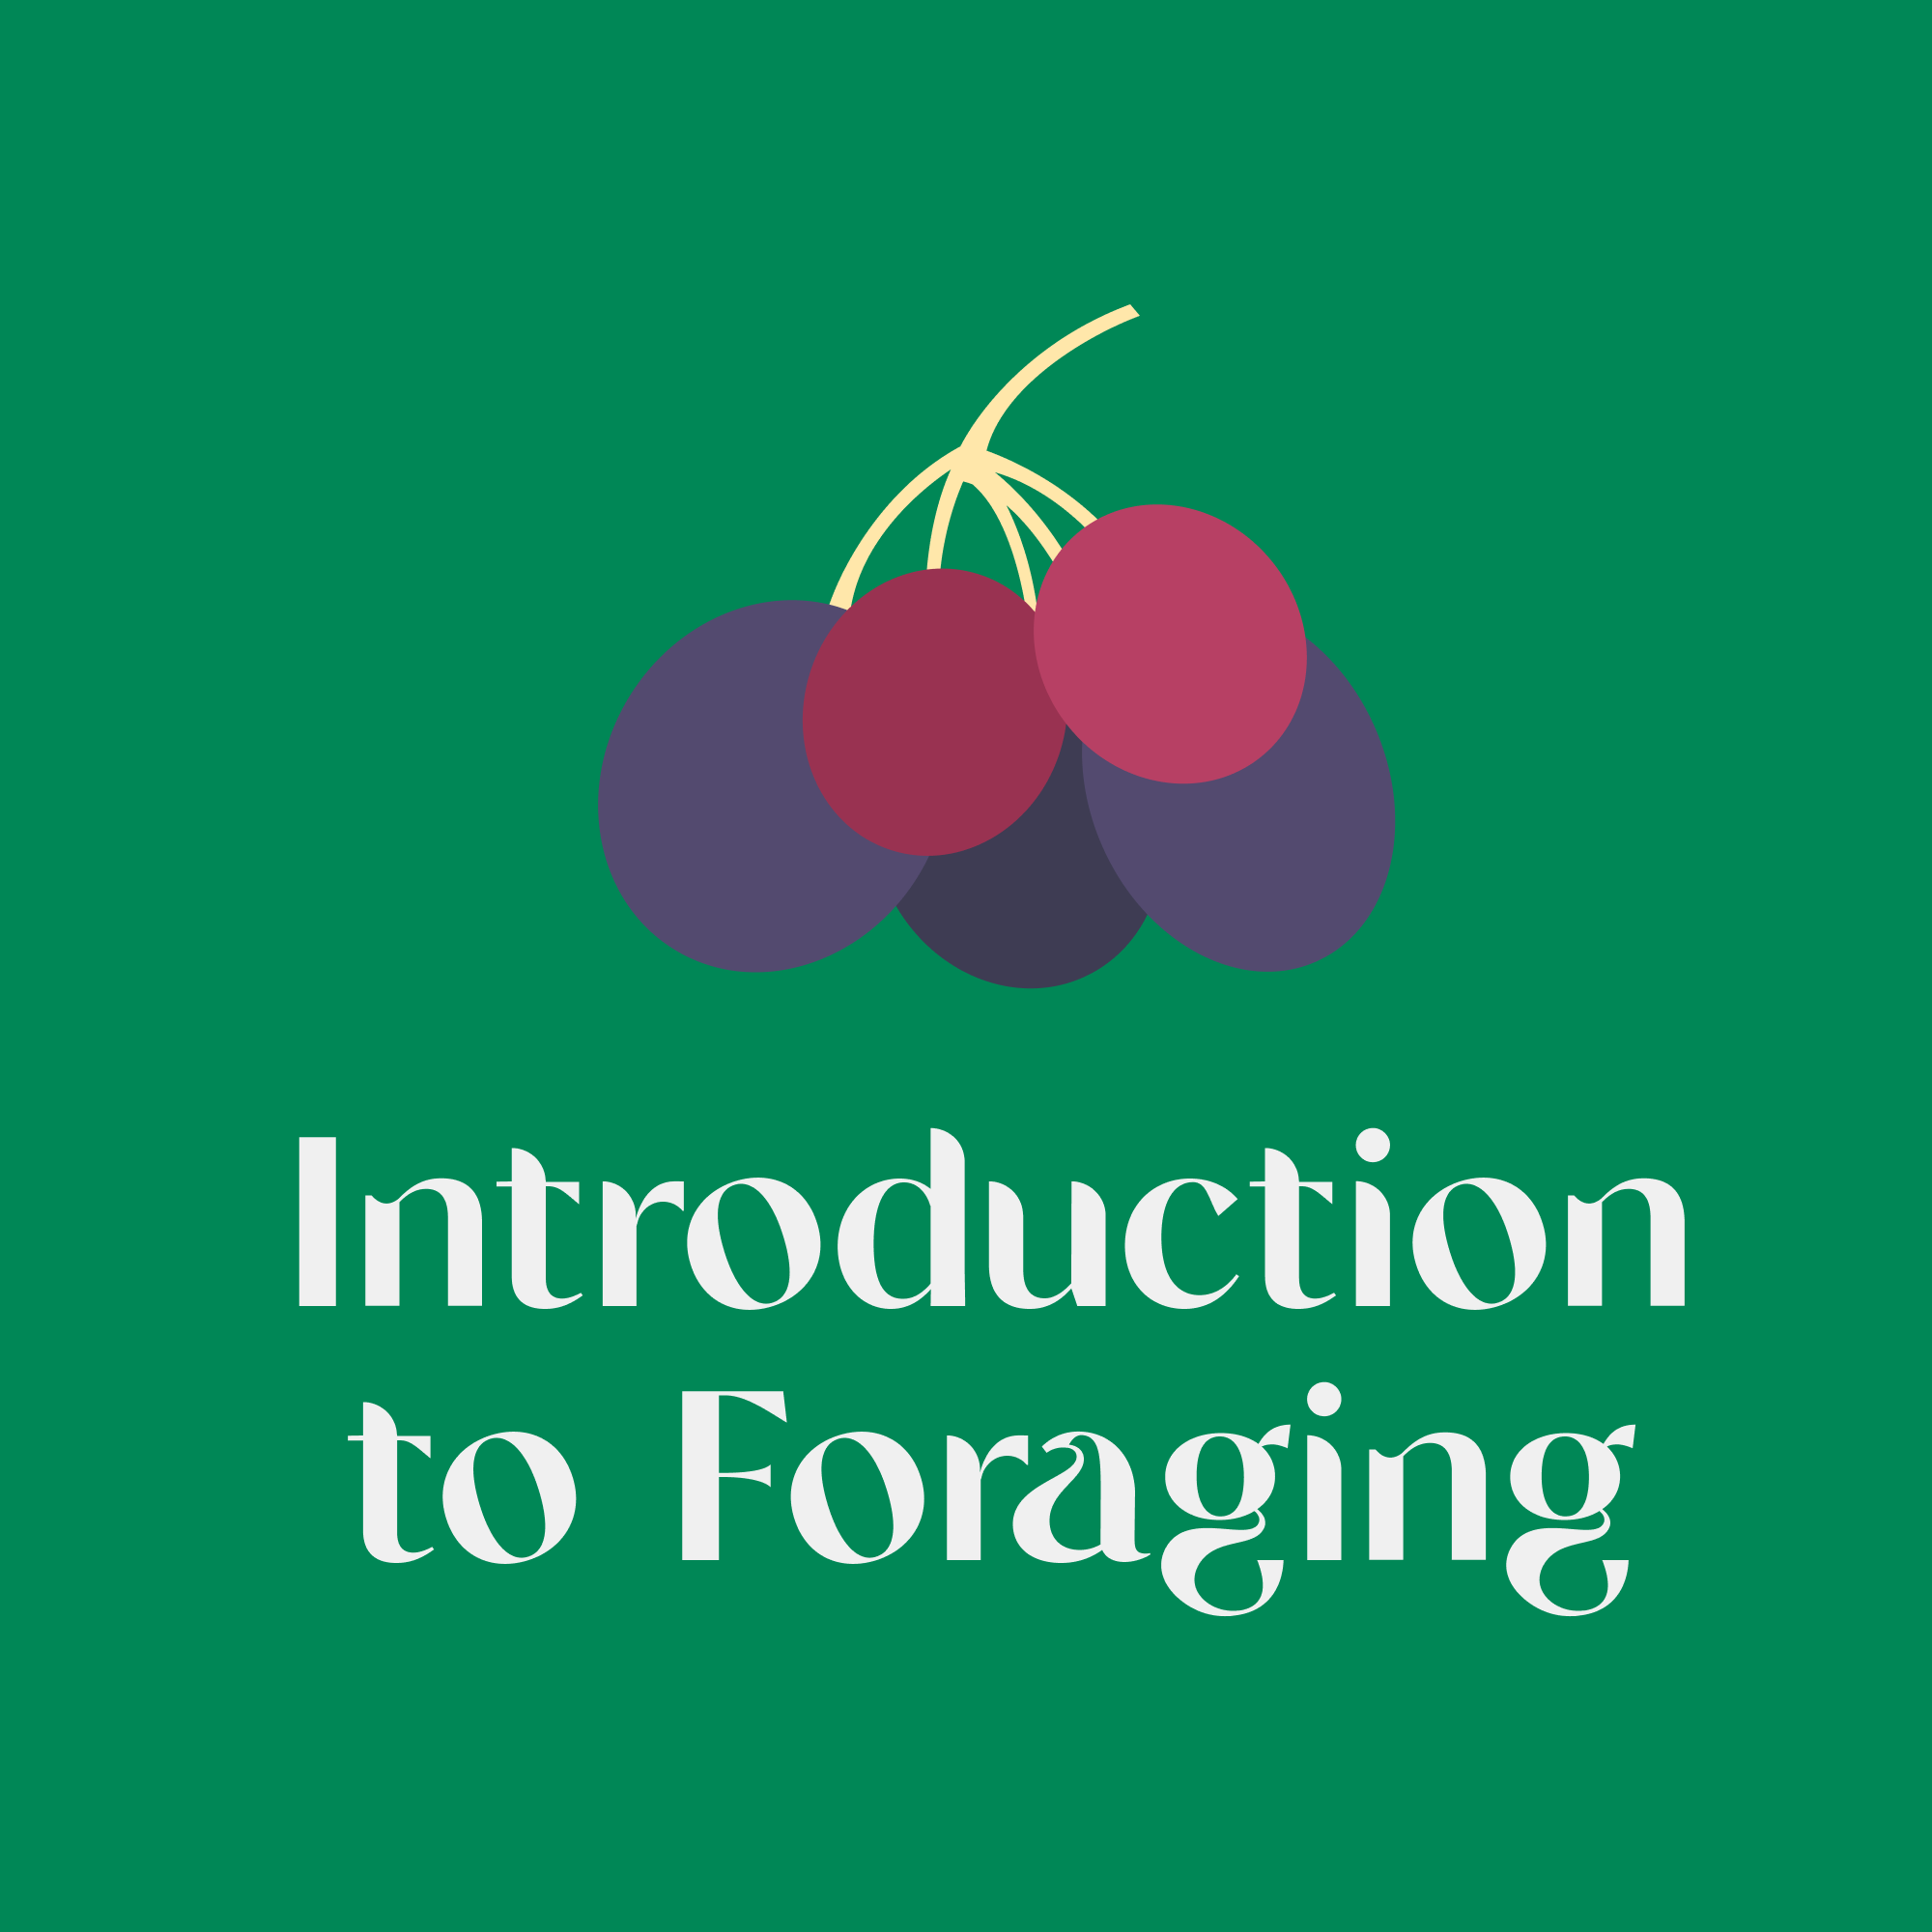 Introduction to Foraging